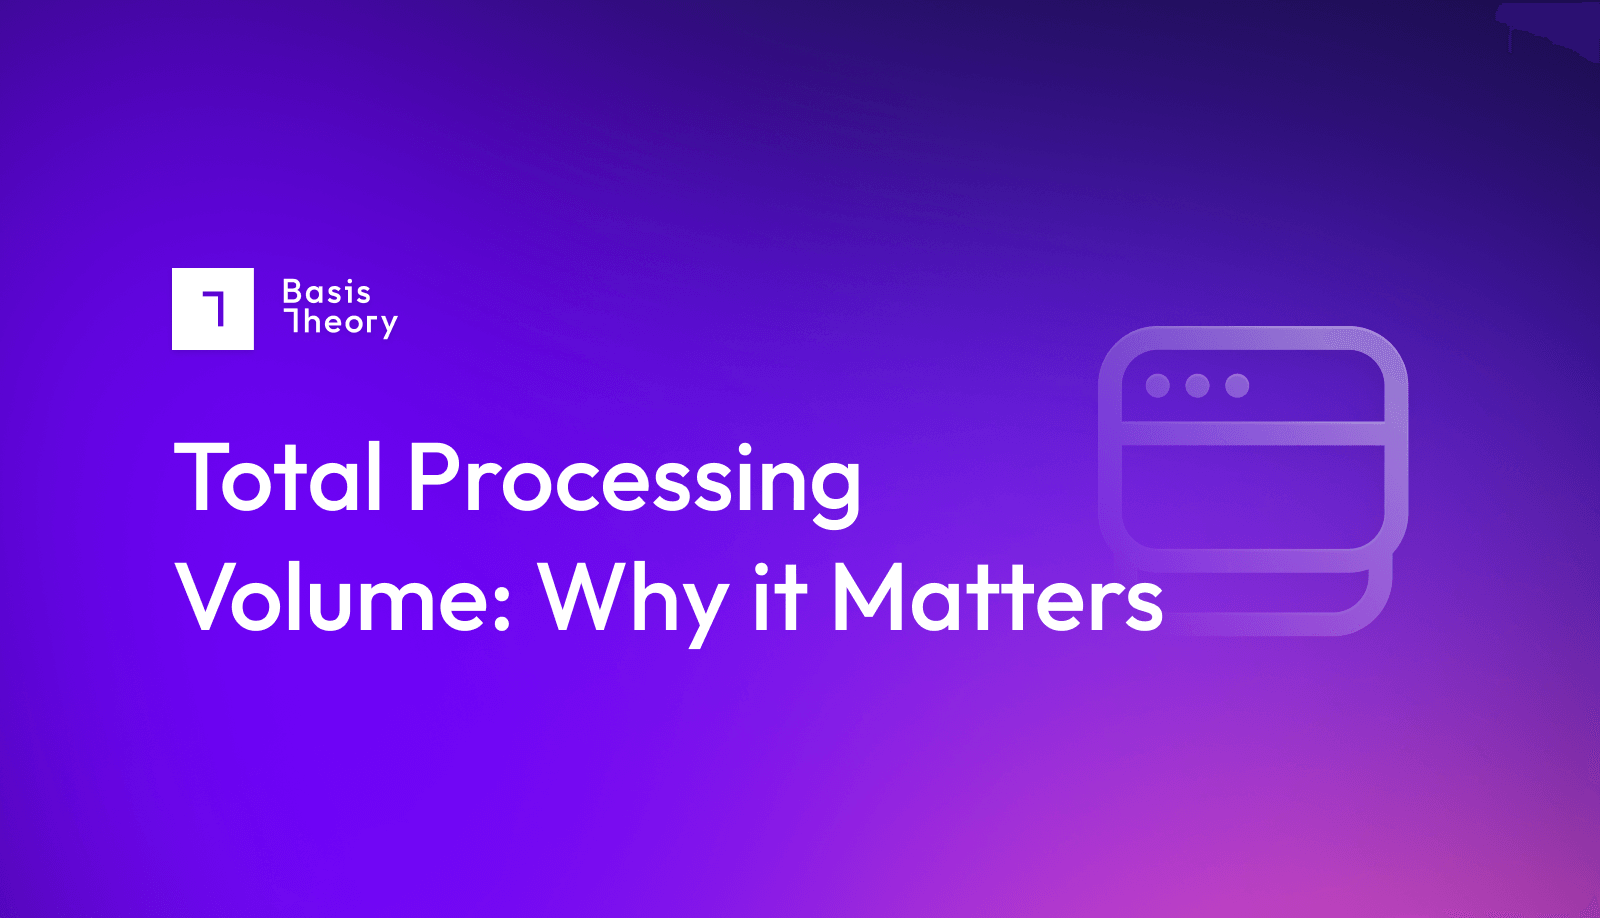 total processing volume: why it matters